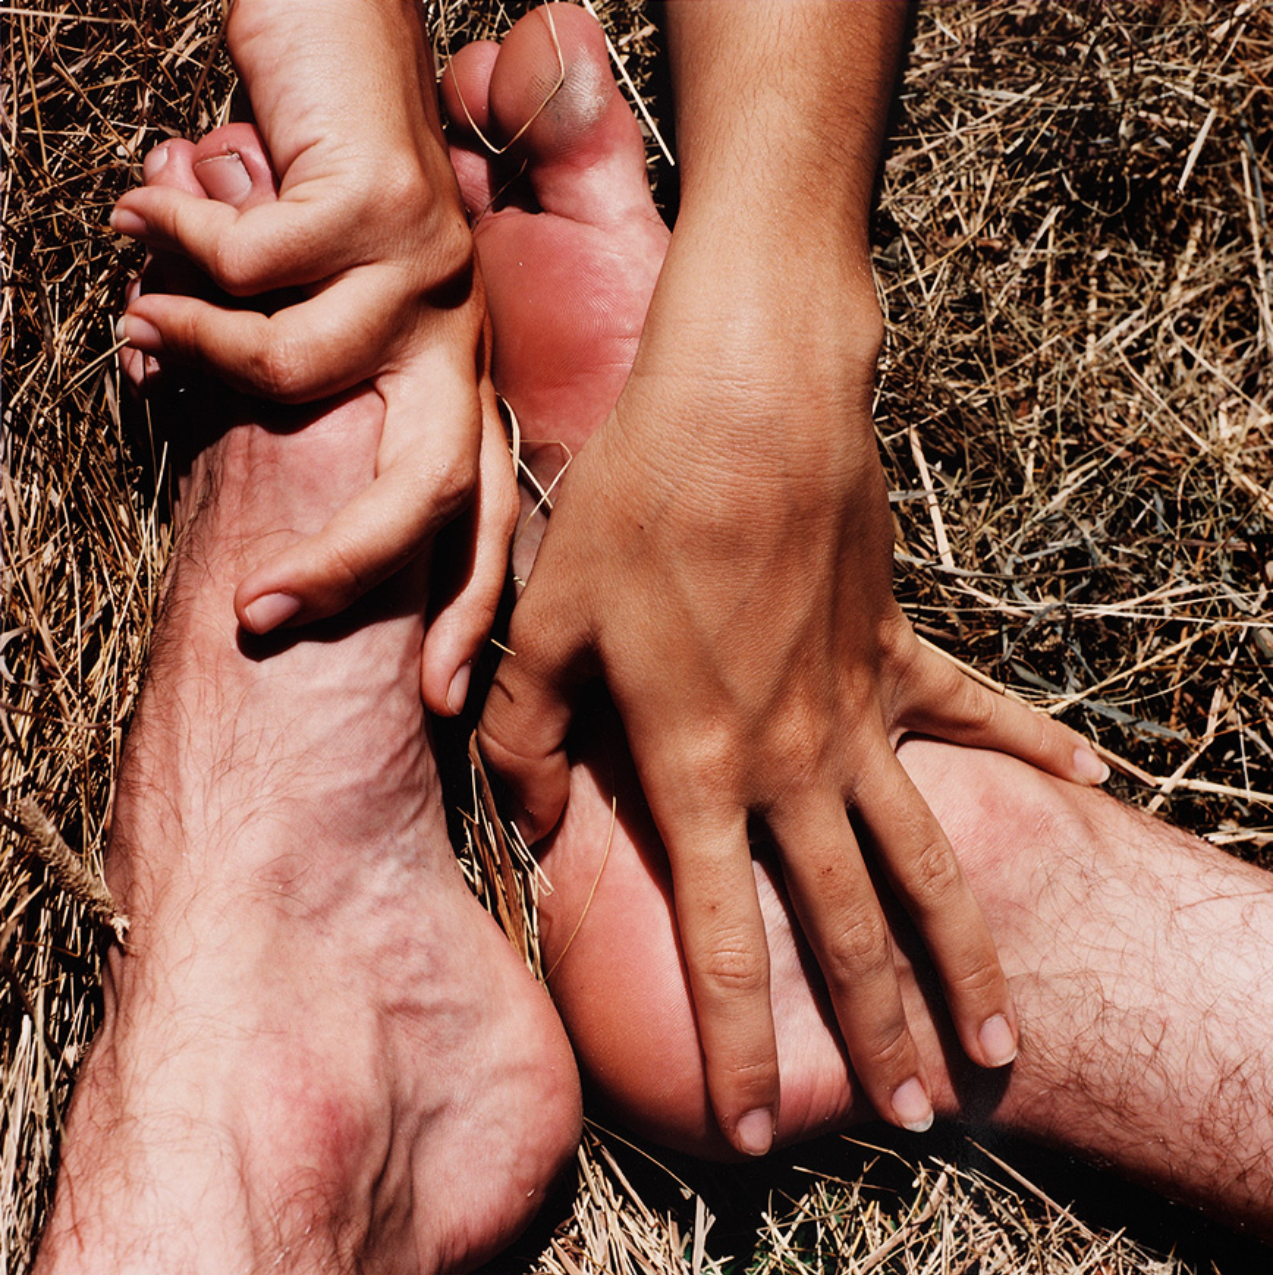 Photograph of two hands touching two feet on the ground.